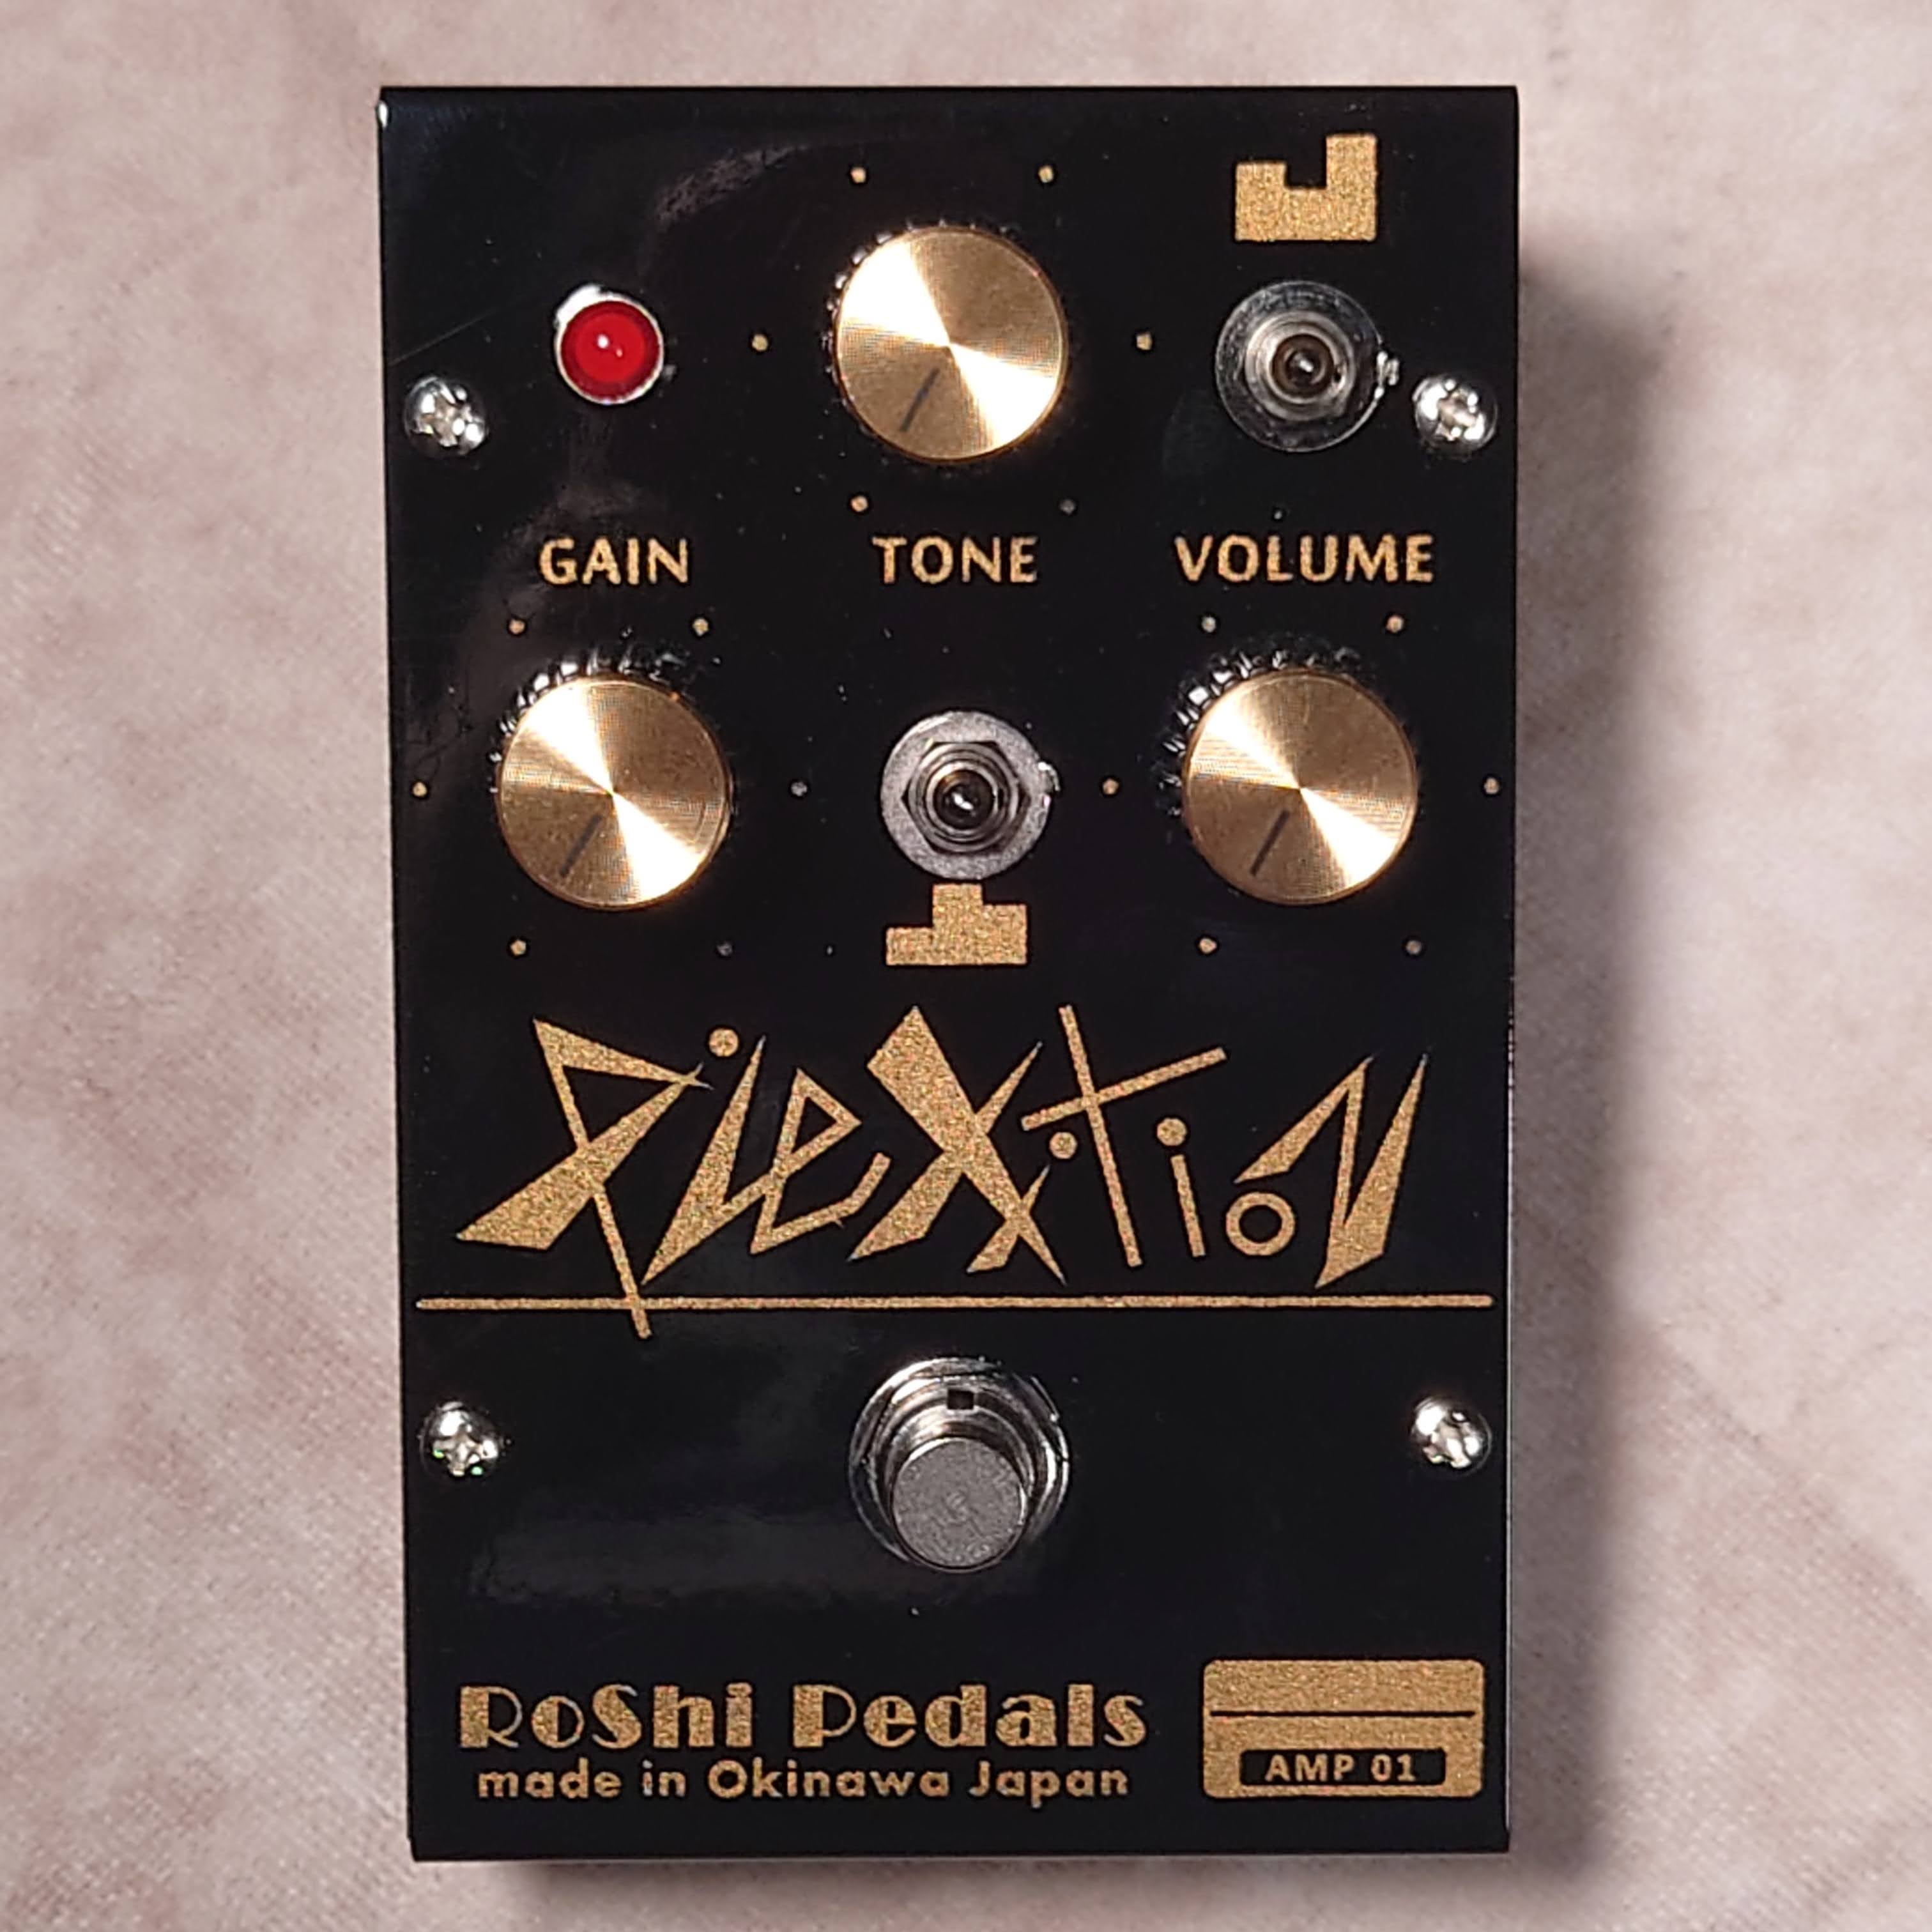 Roshi Pedals / Plexitionギター